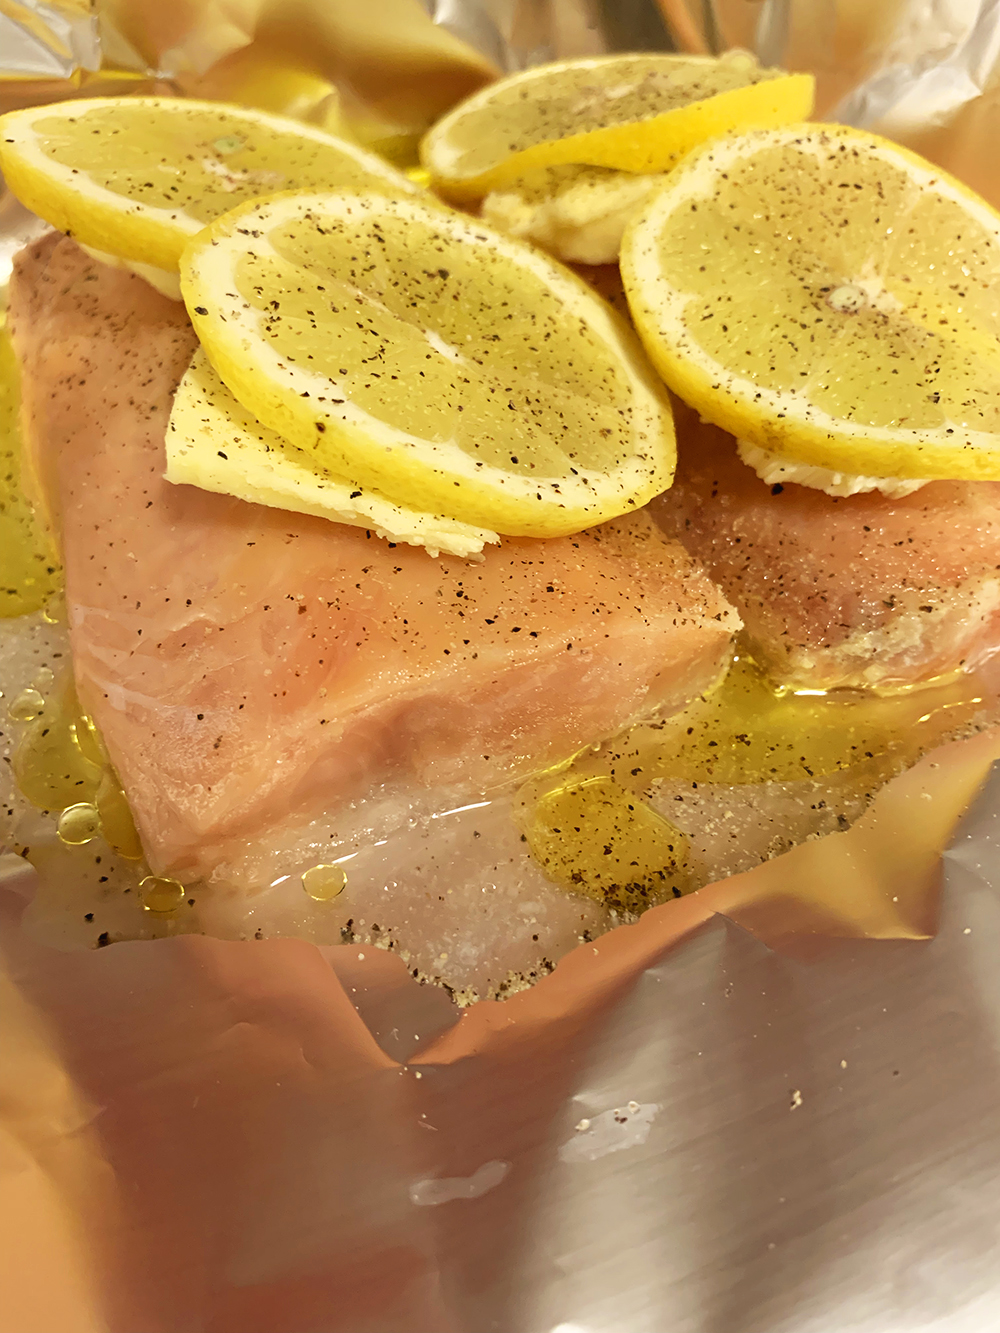 Salmon with butter, lemon, olive oil, salt and pepper in foil "pouch"